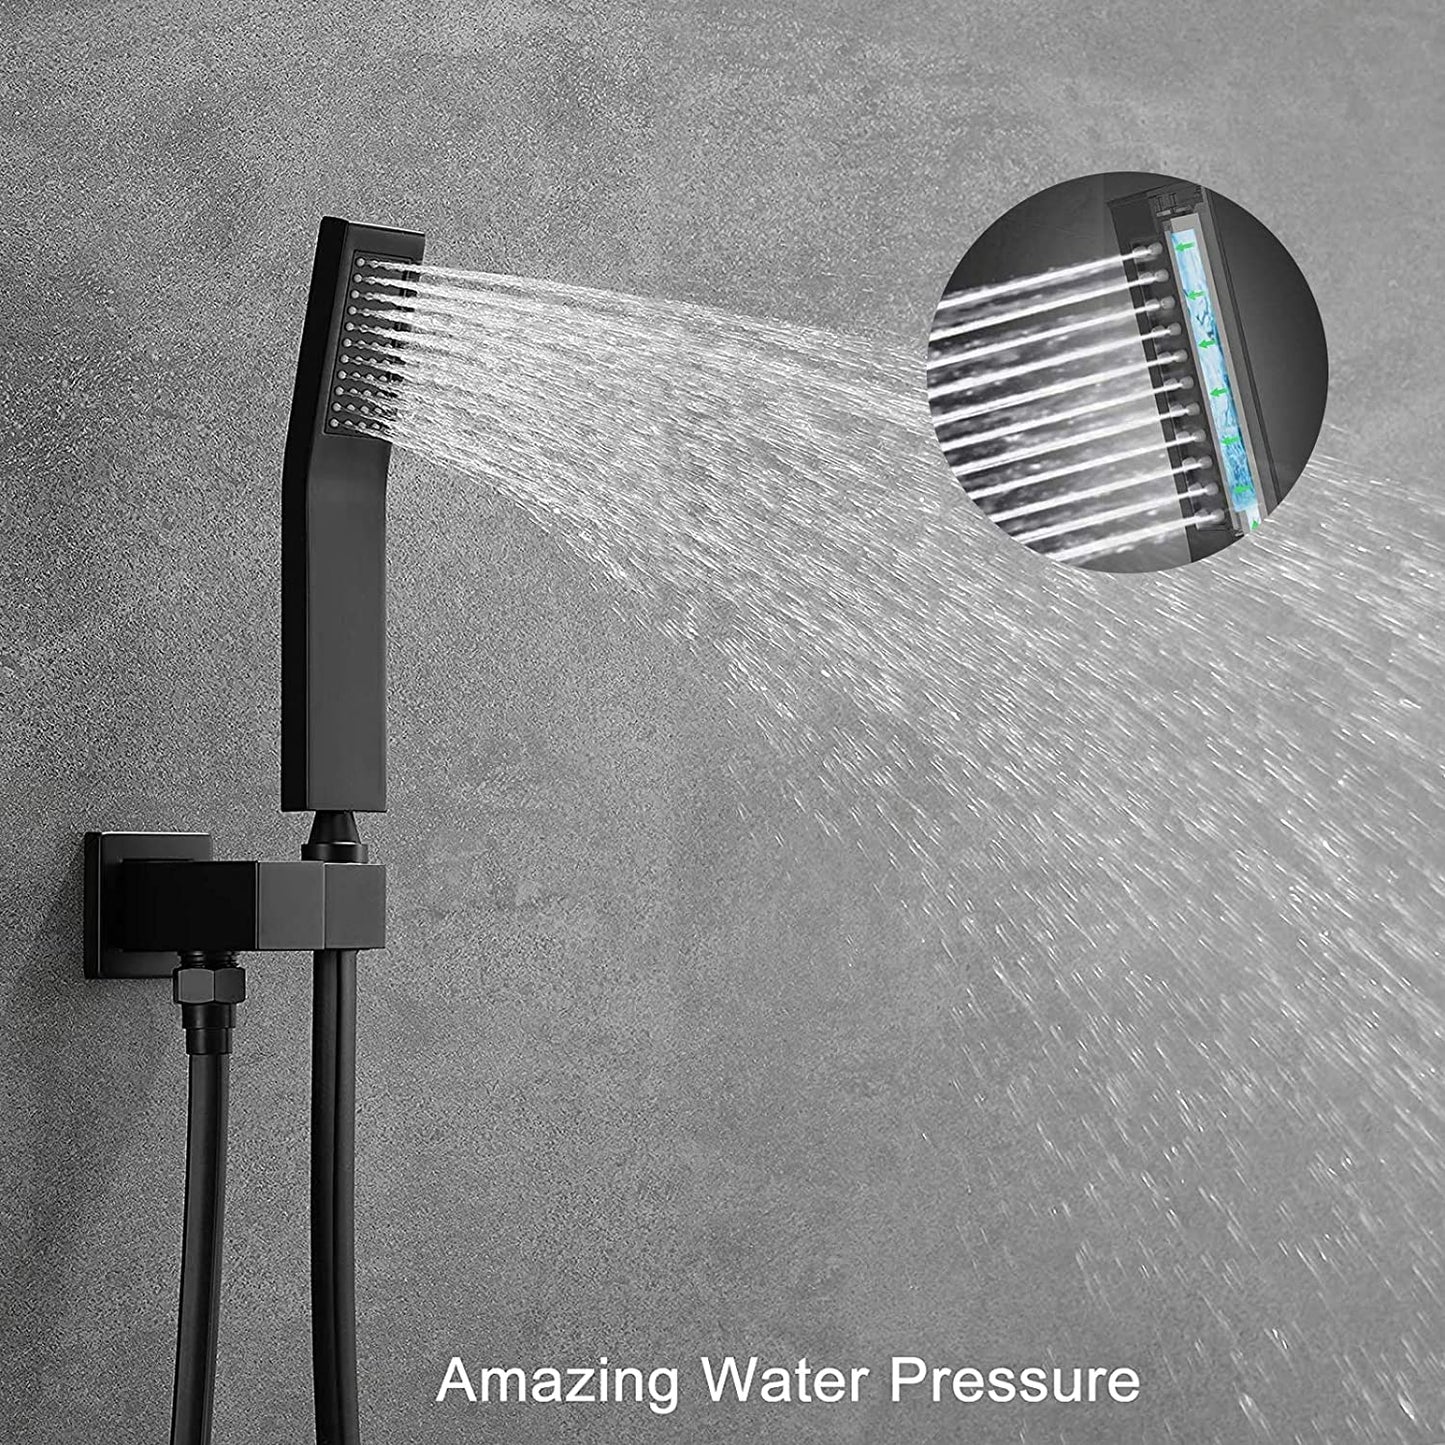 Shower faucet "Forget trouble"